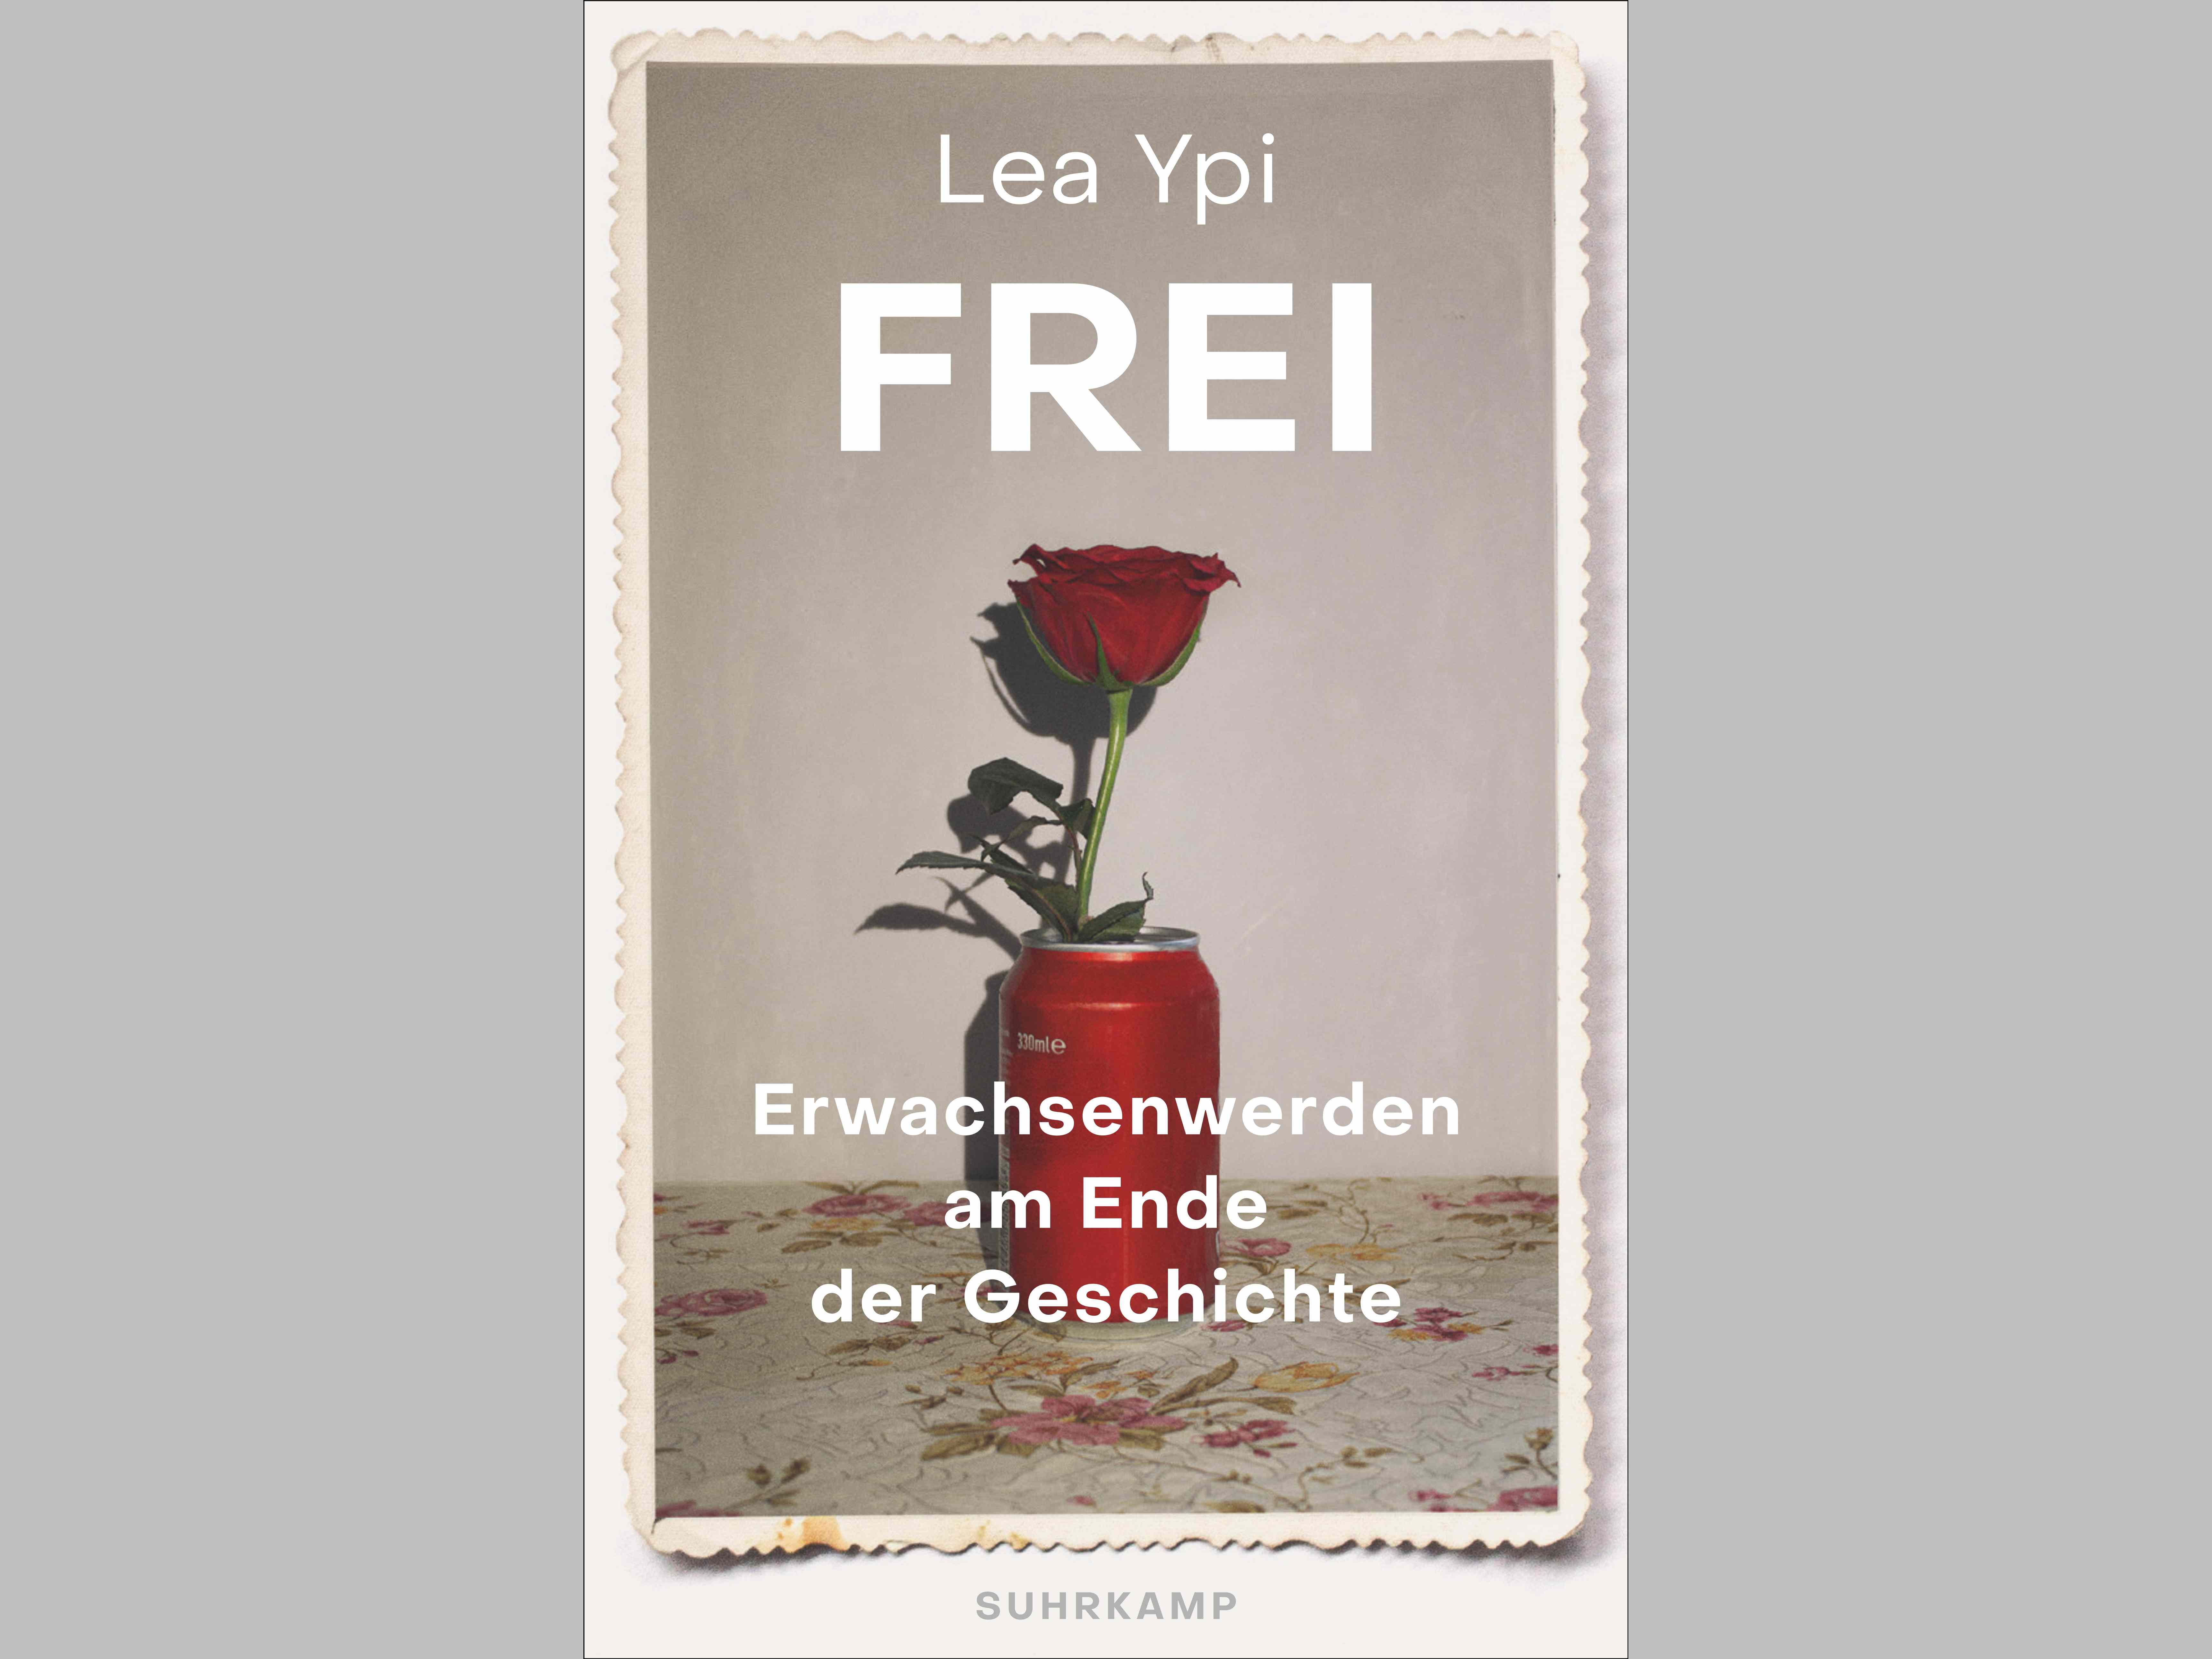 Lea Ypi: "Free" - reading & conversation (in English)